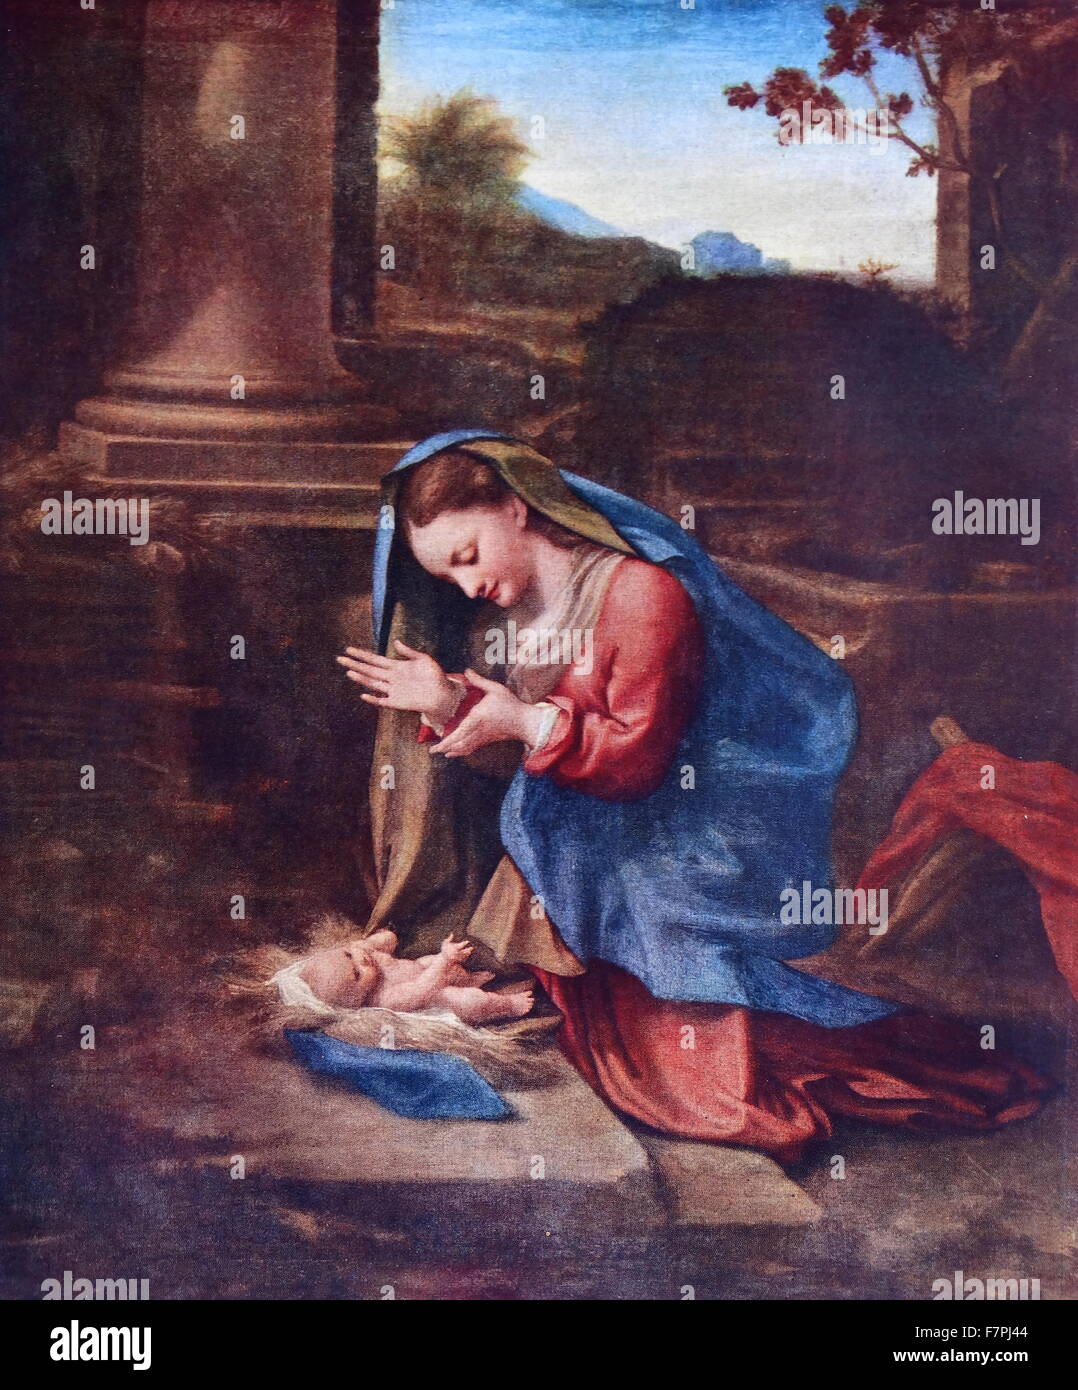 Painting titled 'The Virgin Adoring the Christ Child' by Antonio da Correggio (1489-1534) painter of the Parma school of the Italian Renaissance. Dated 16th Century; Stock Photo